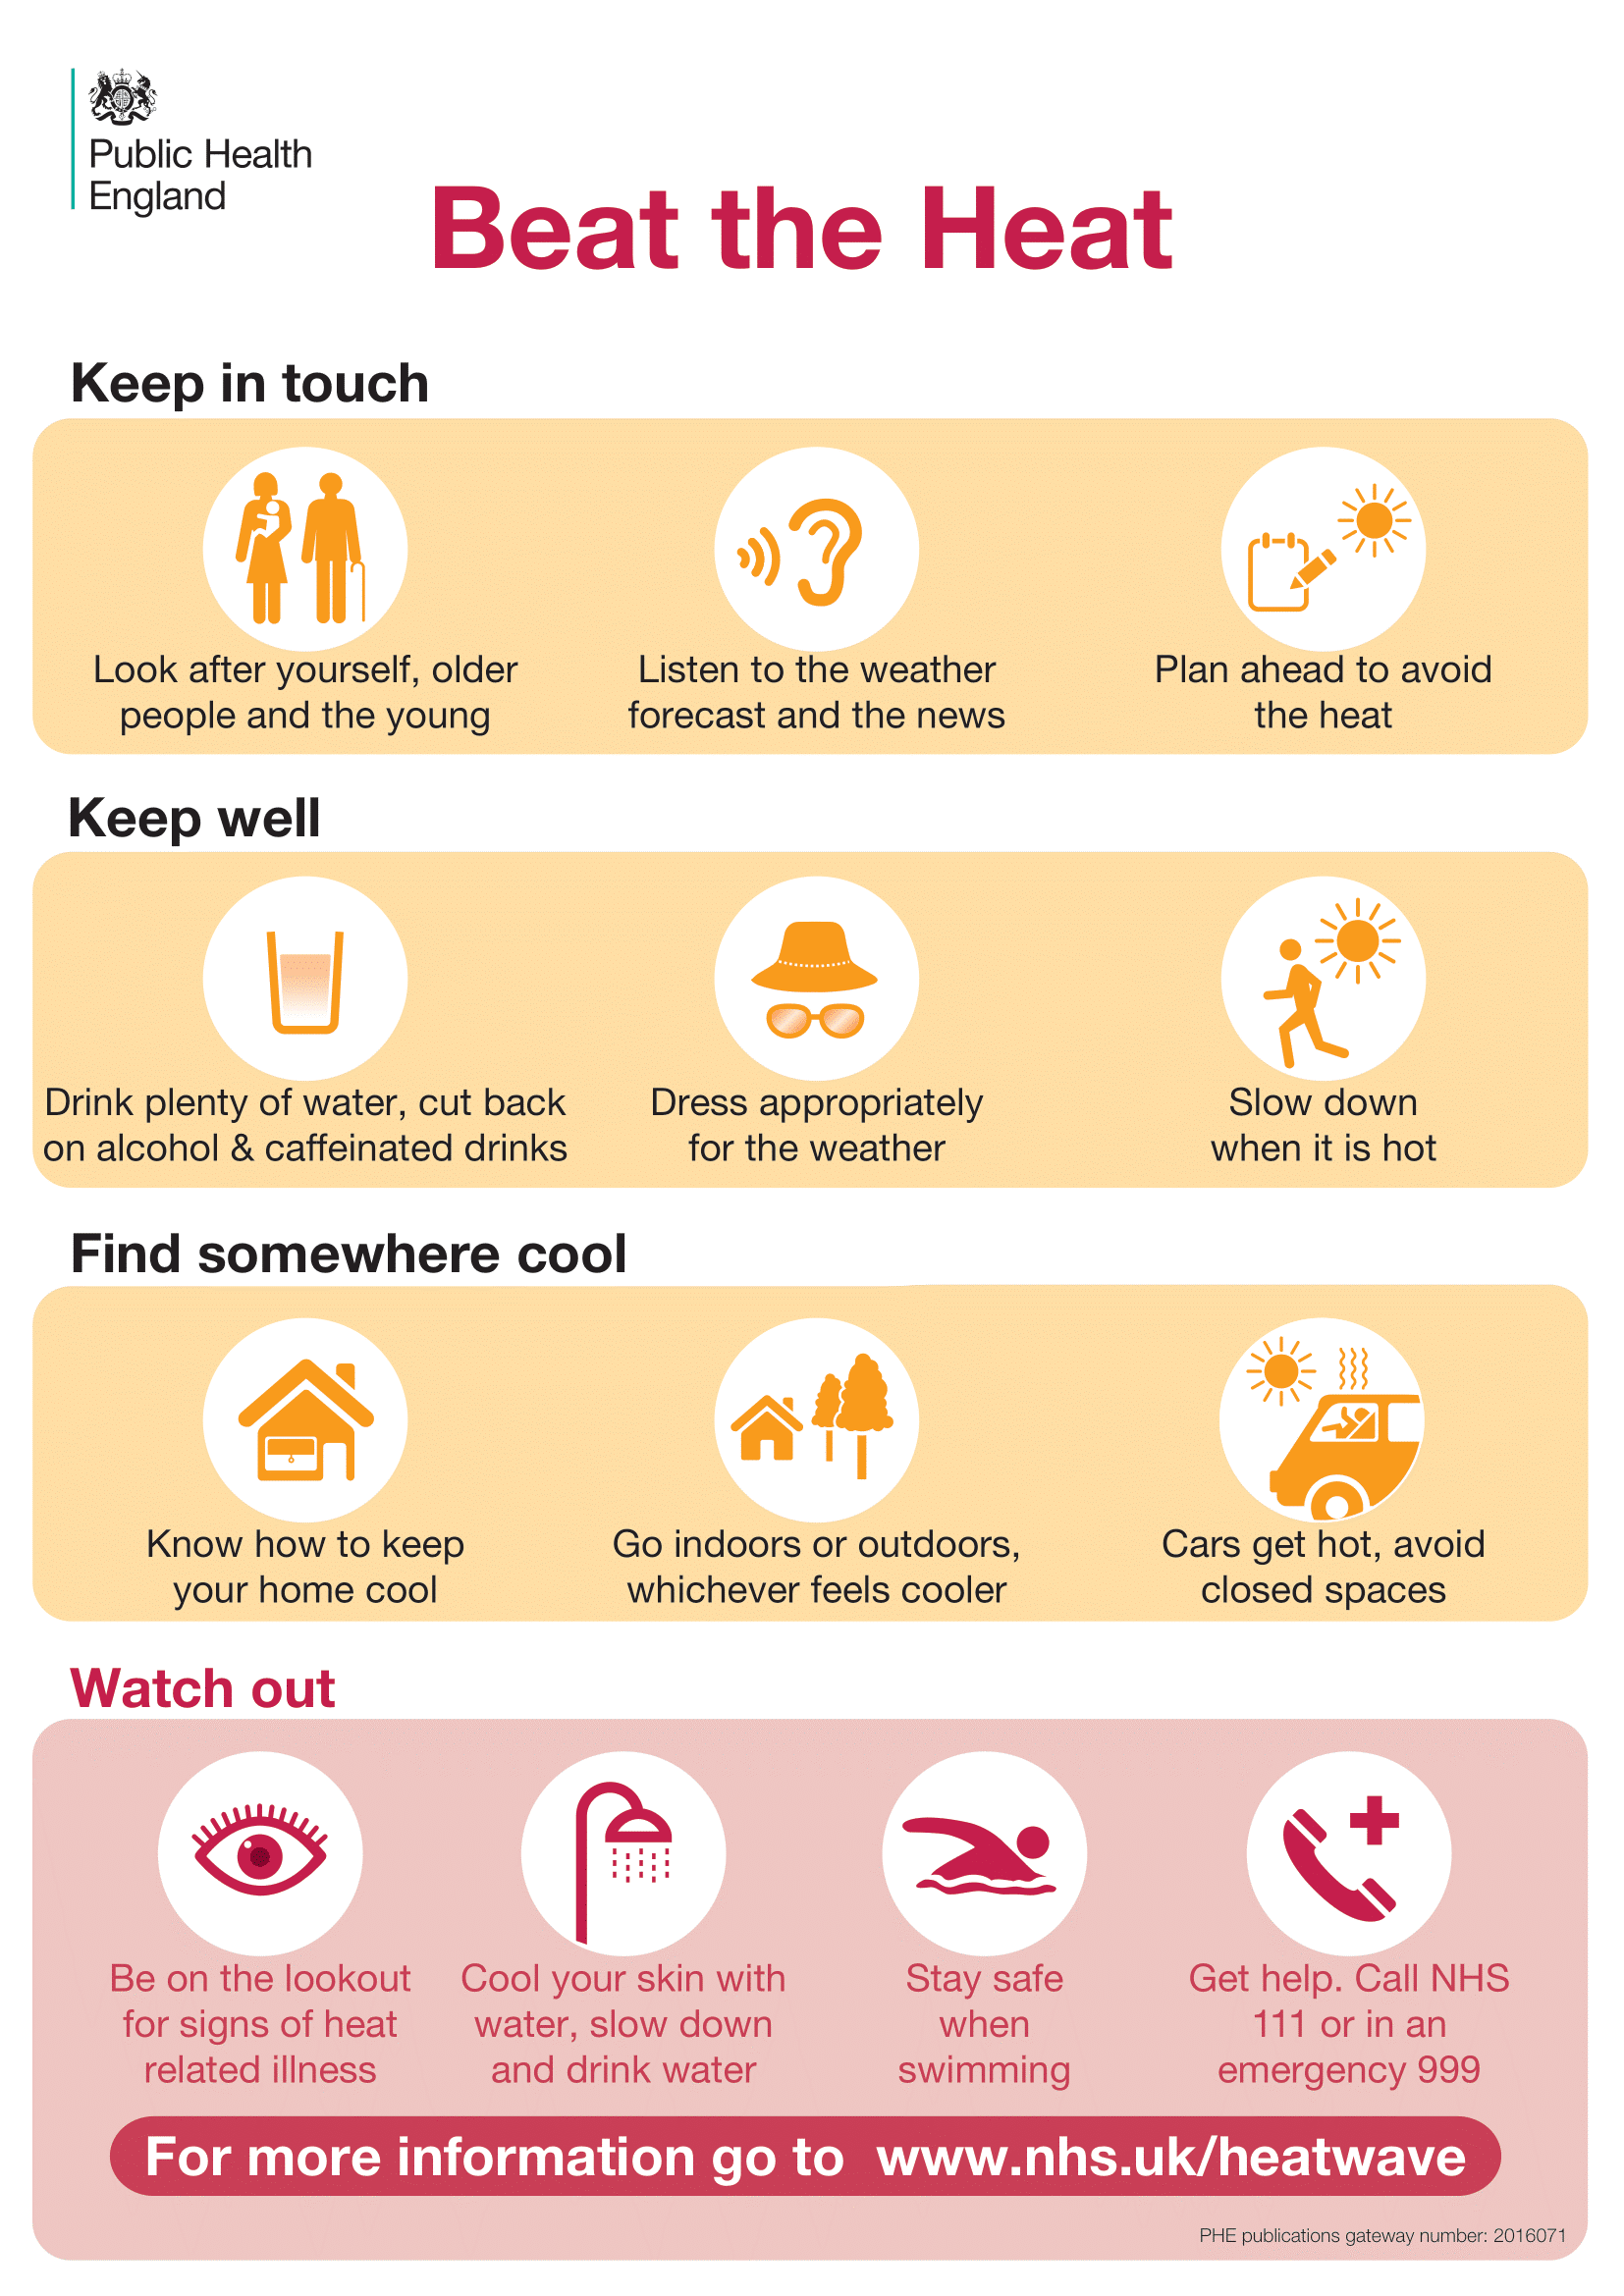 guidance on keeping cool in warm weather